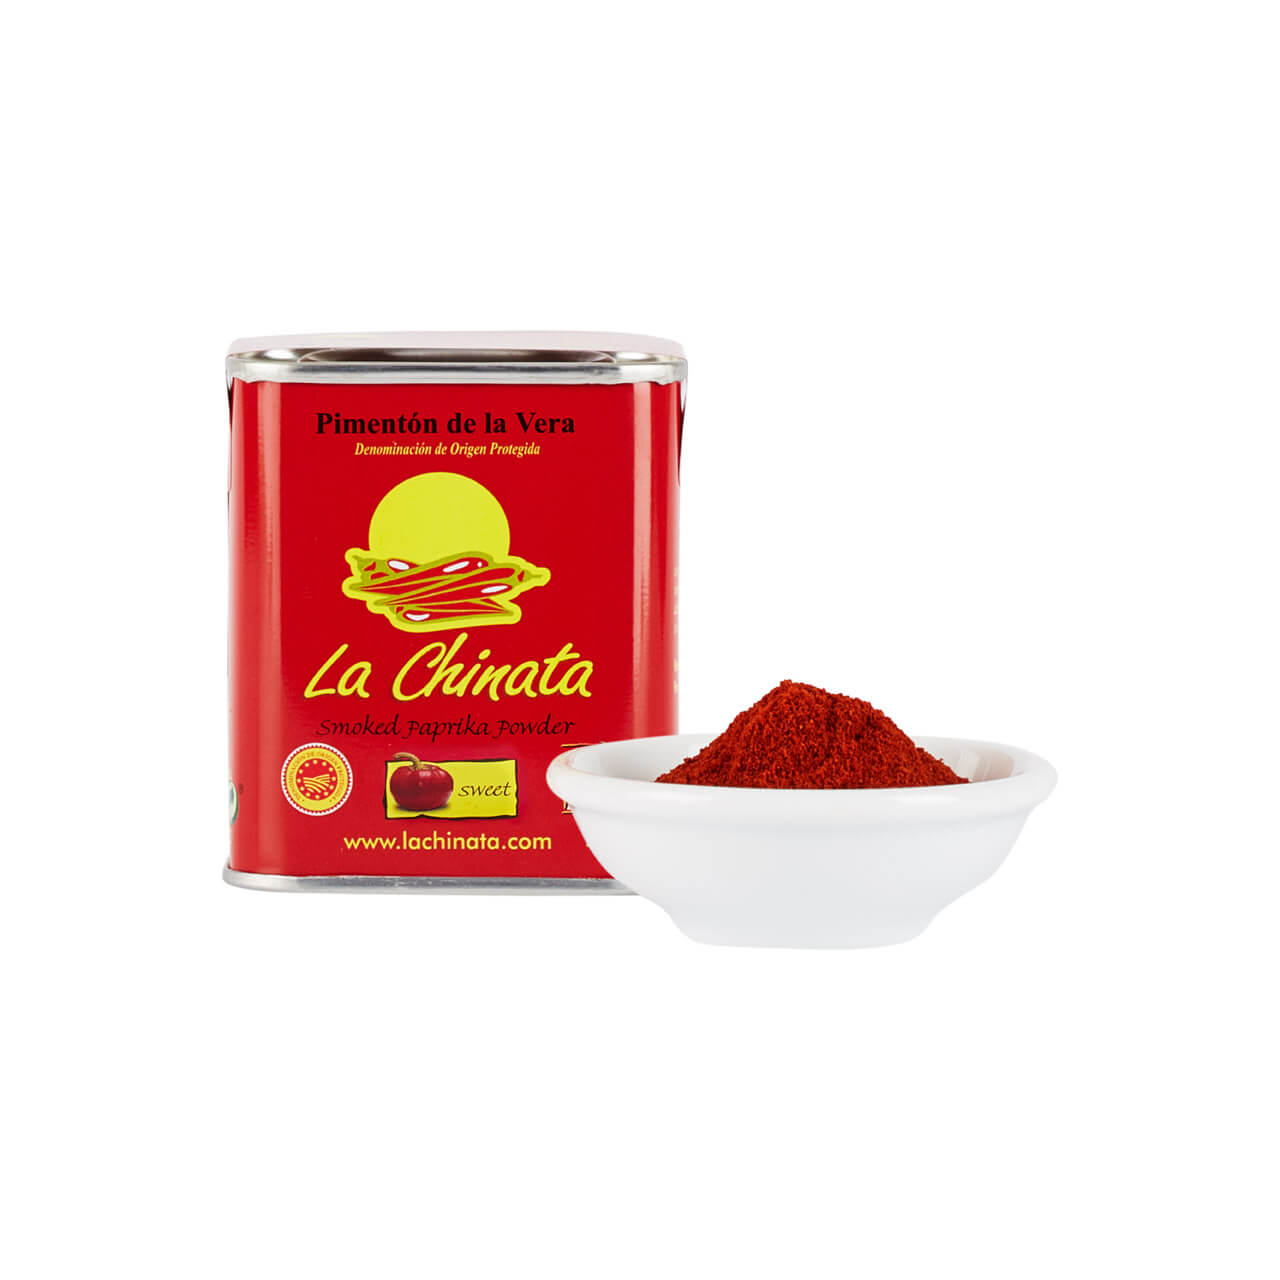 La Chinata: Seasoned Olive Oil (With Chili and Paprika) from Spain (250 ml)